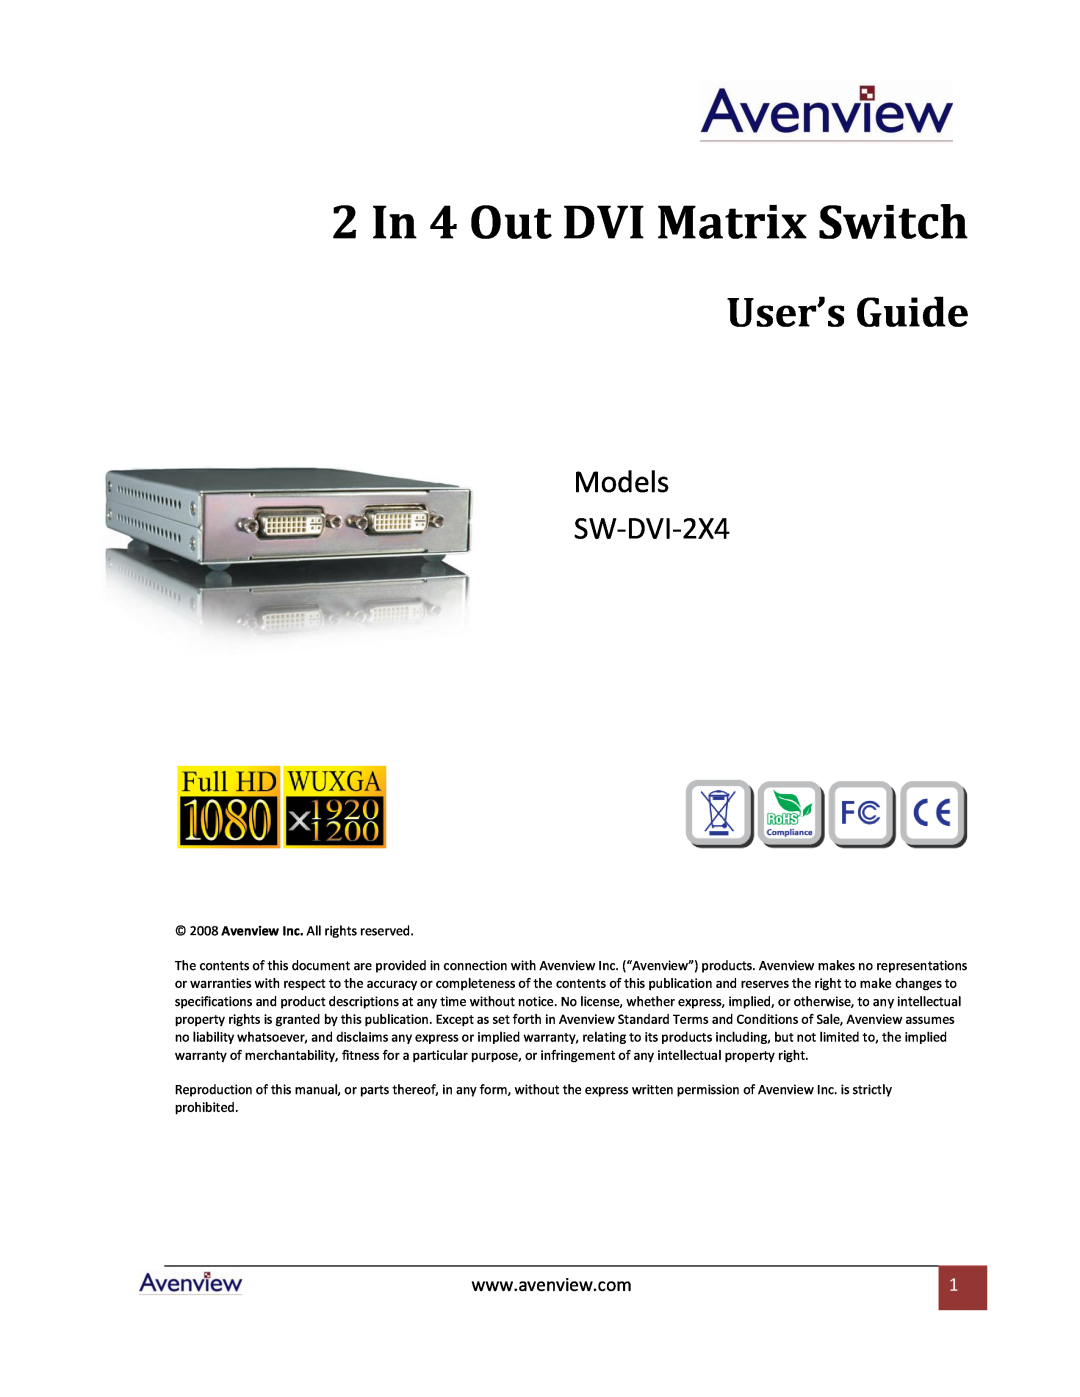 Avenview specifications 2 In 4 Out DVI Matrix Switch, User’s Guide, Models SW-DVI-2X4 